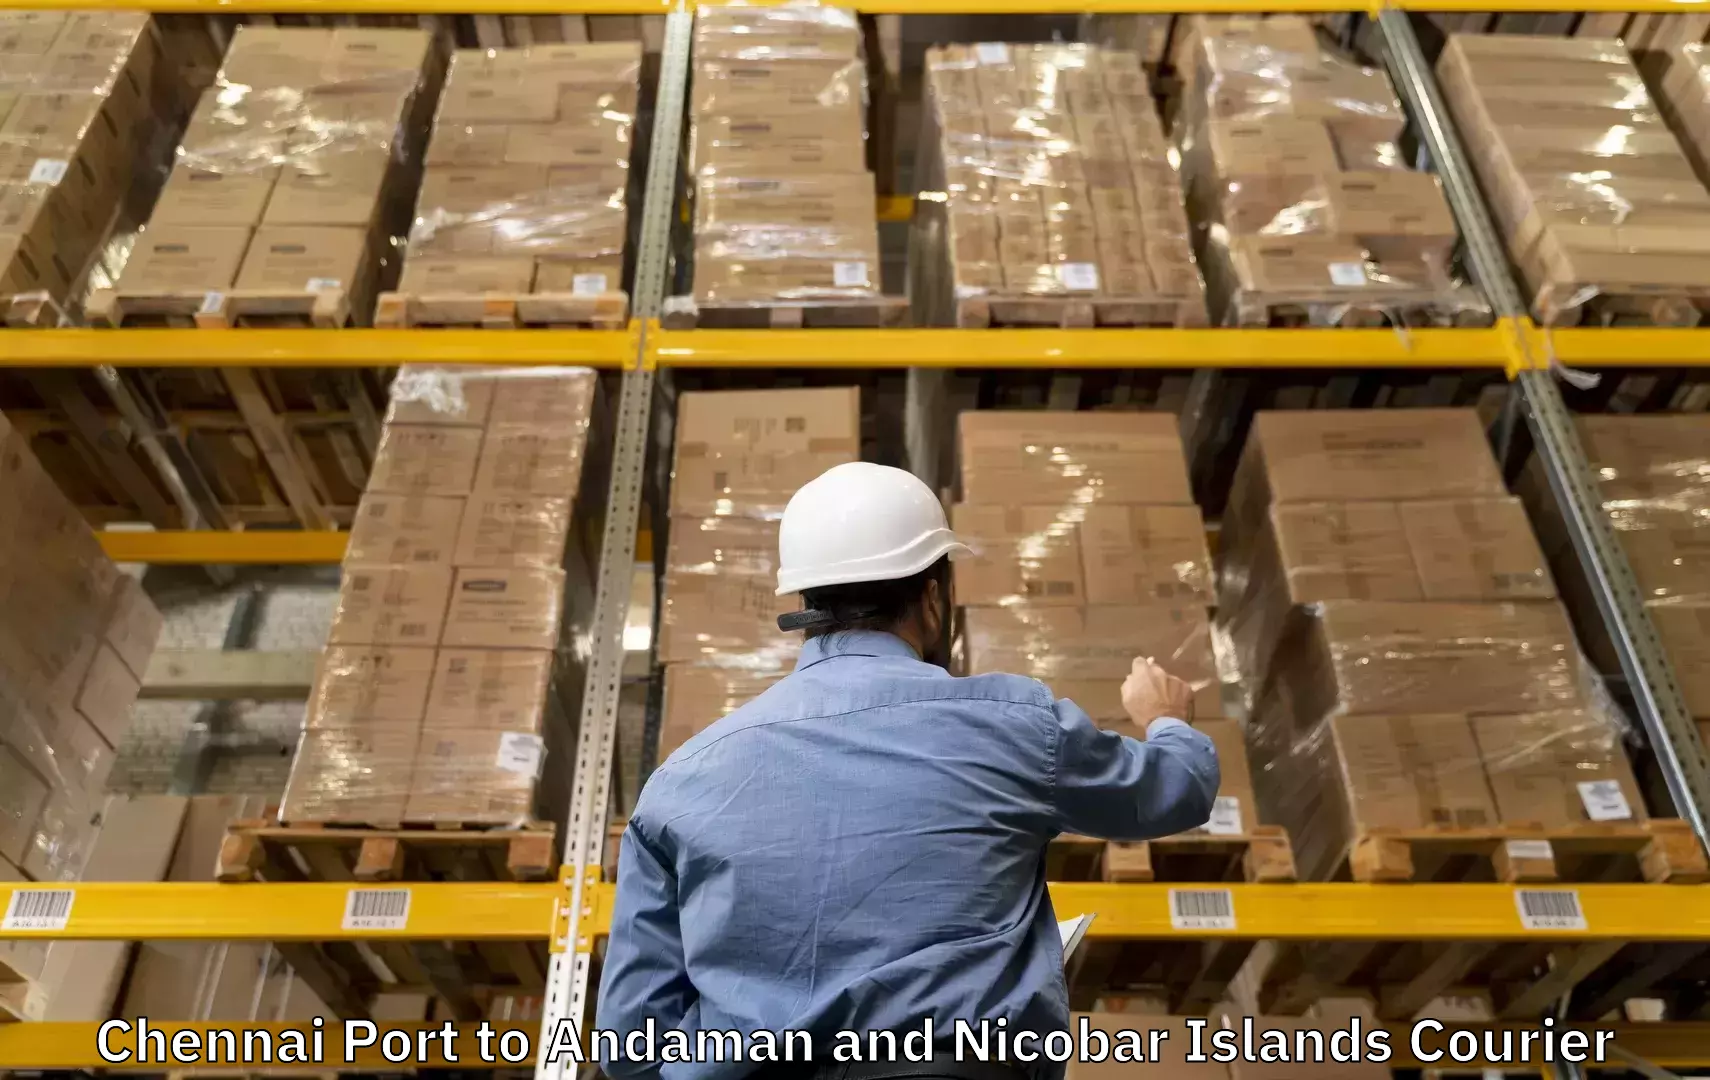 Efficient luggage delivery in Chennai Port to Port Blair